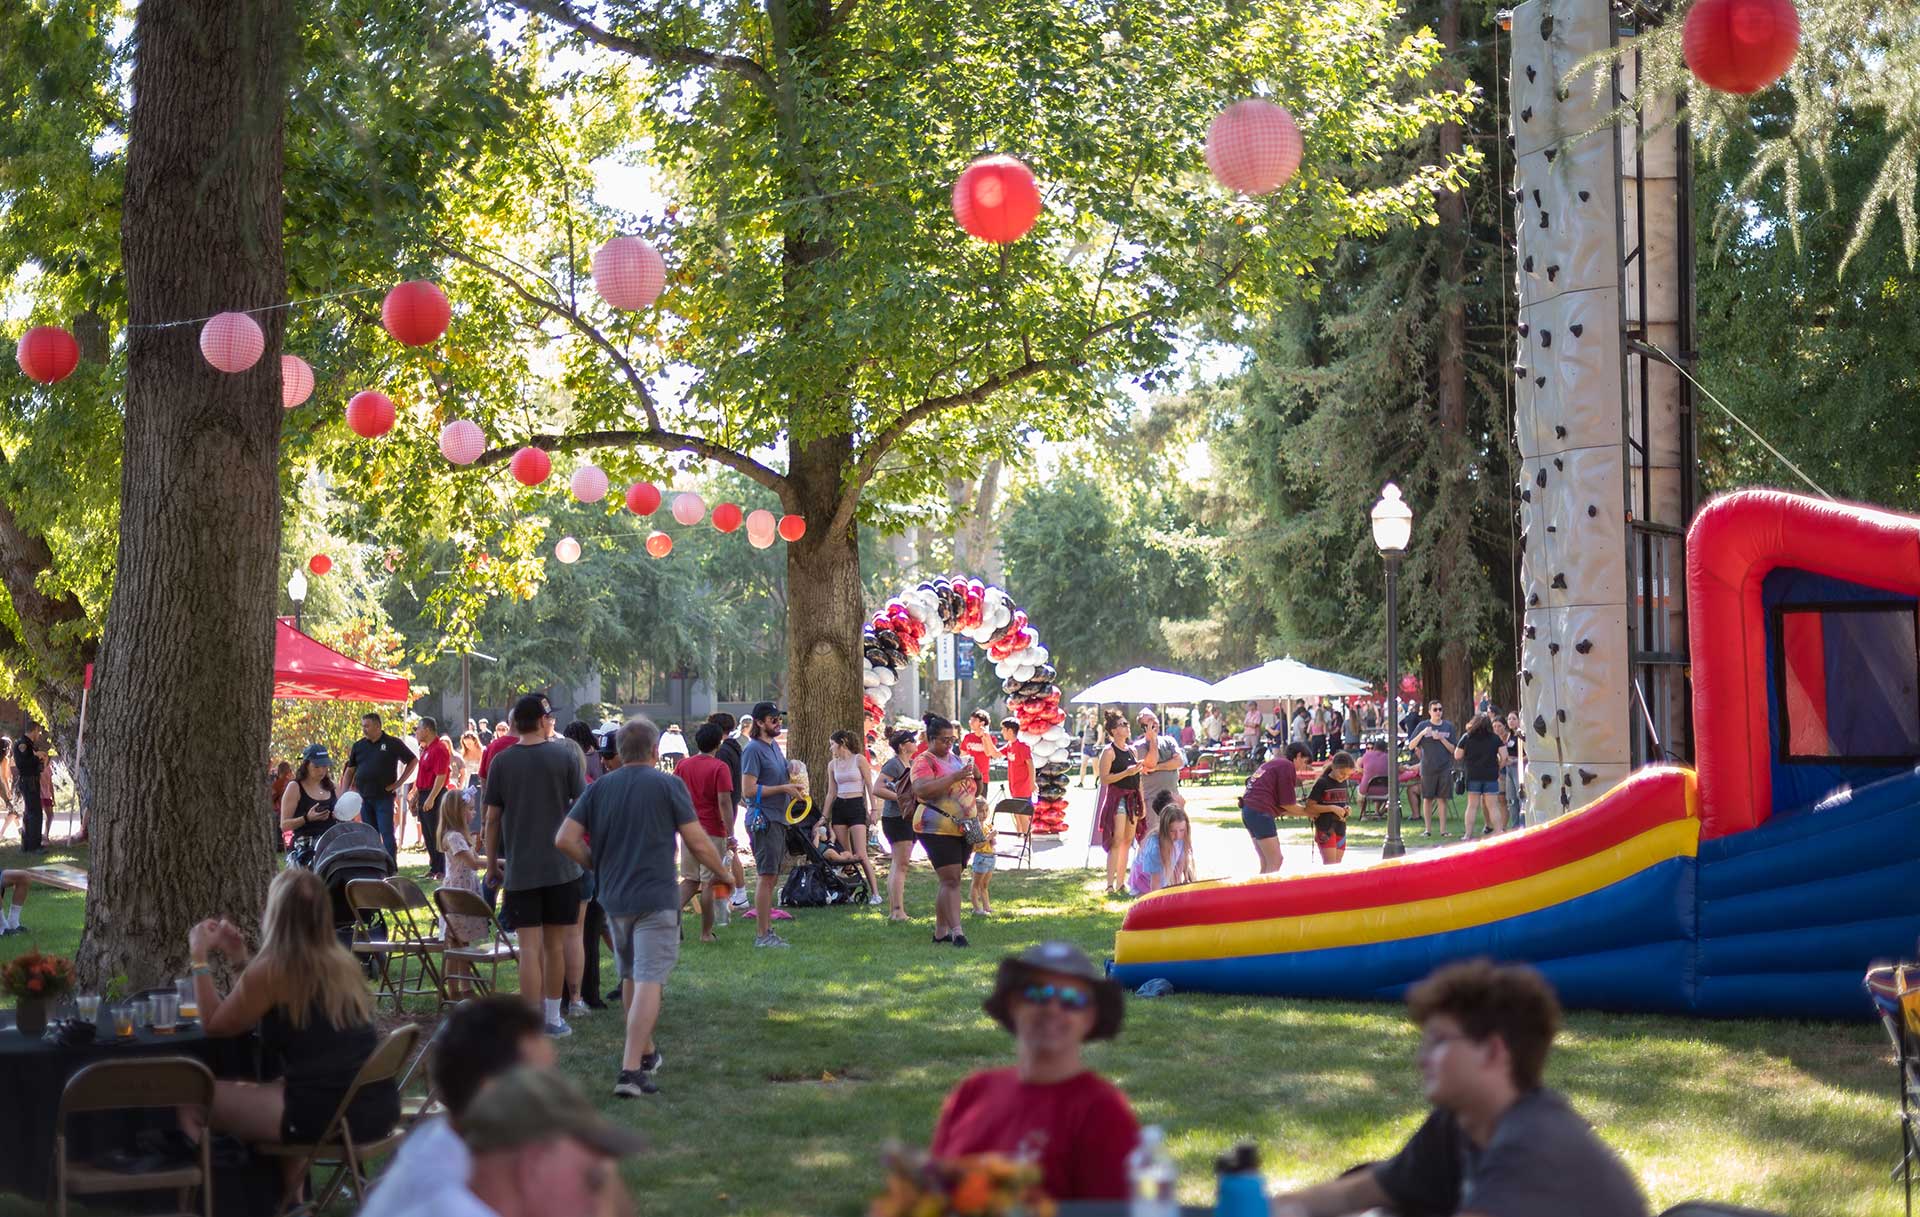 People are gathered on the lawn in front of Kendall Hall, which decorated with lights, balloons, and a bouncy house in honor of Homecoming Weekend.